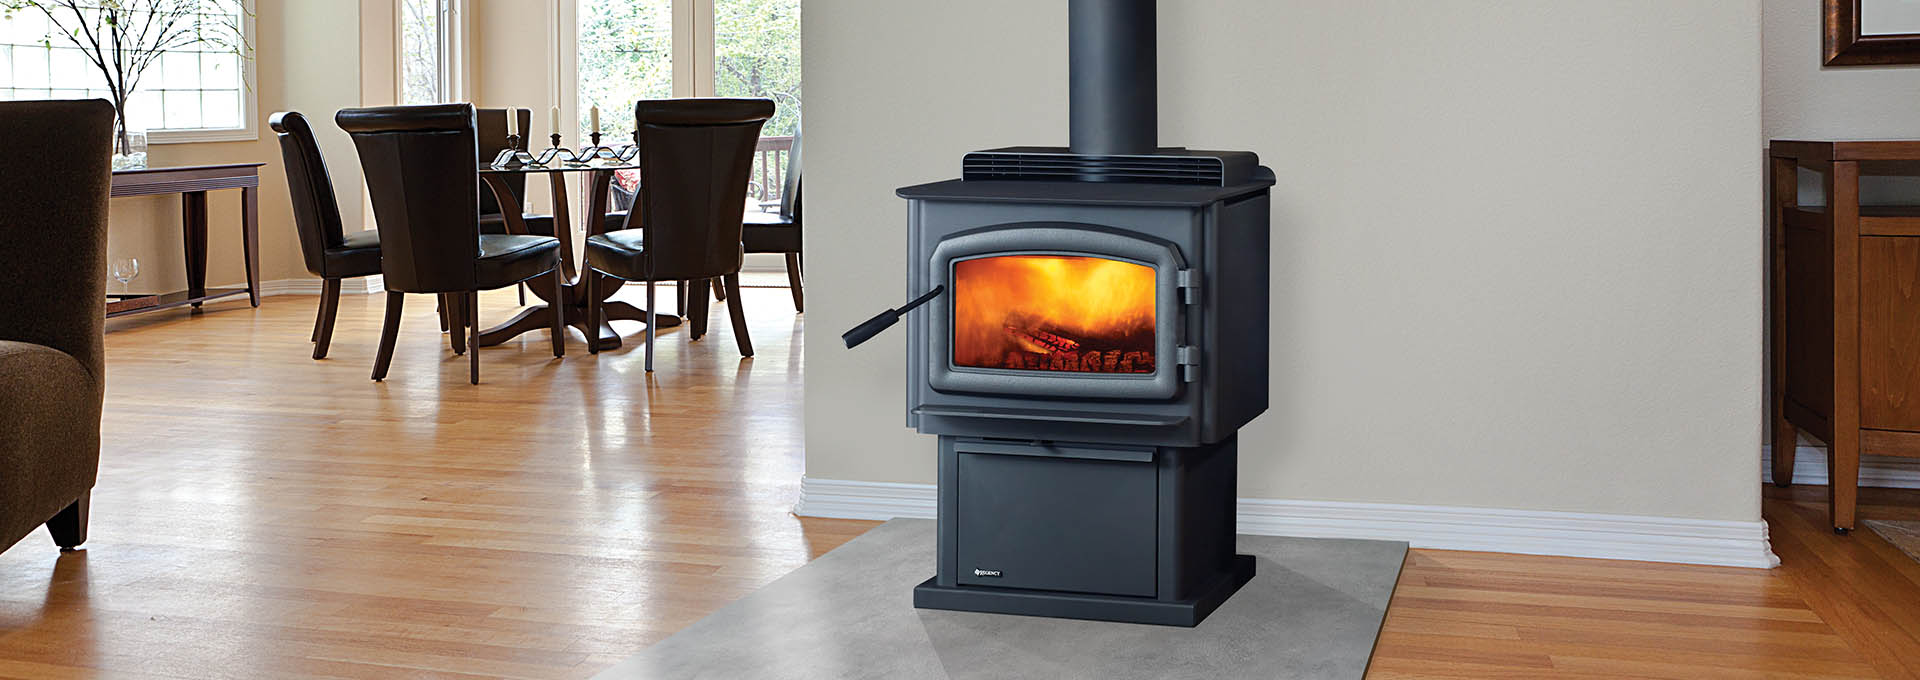 Cost of Operating a Wood Stove | Cord Calculator | Regency